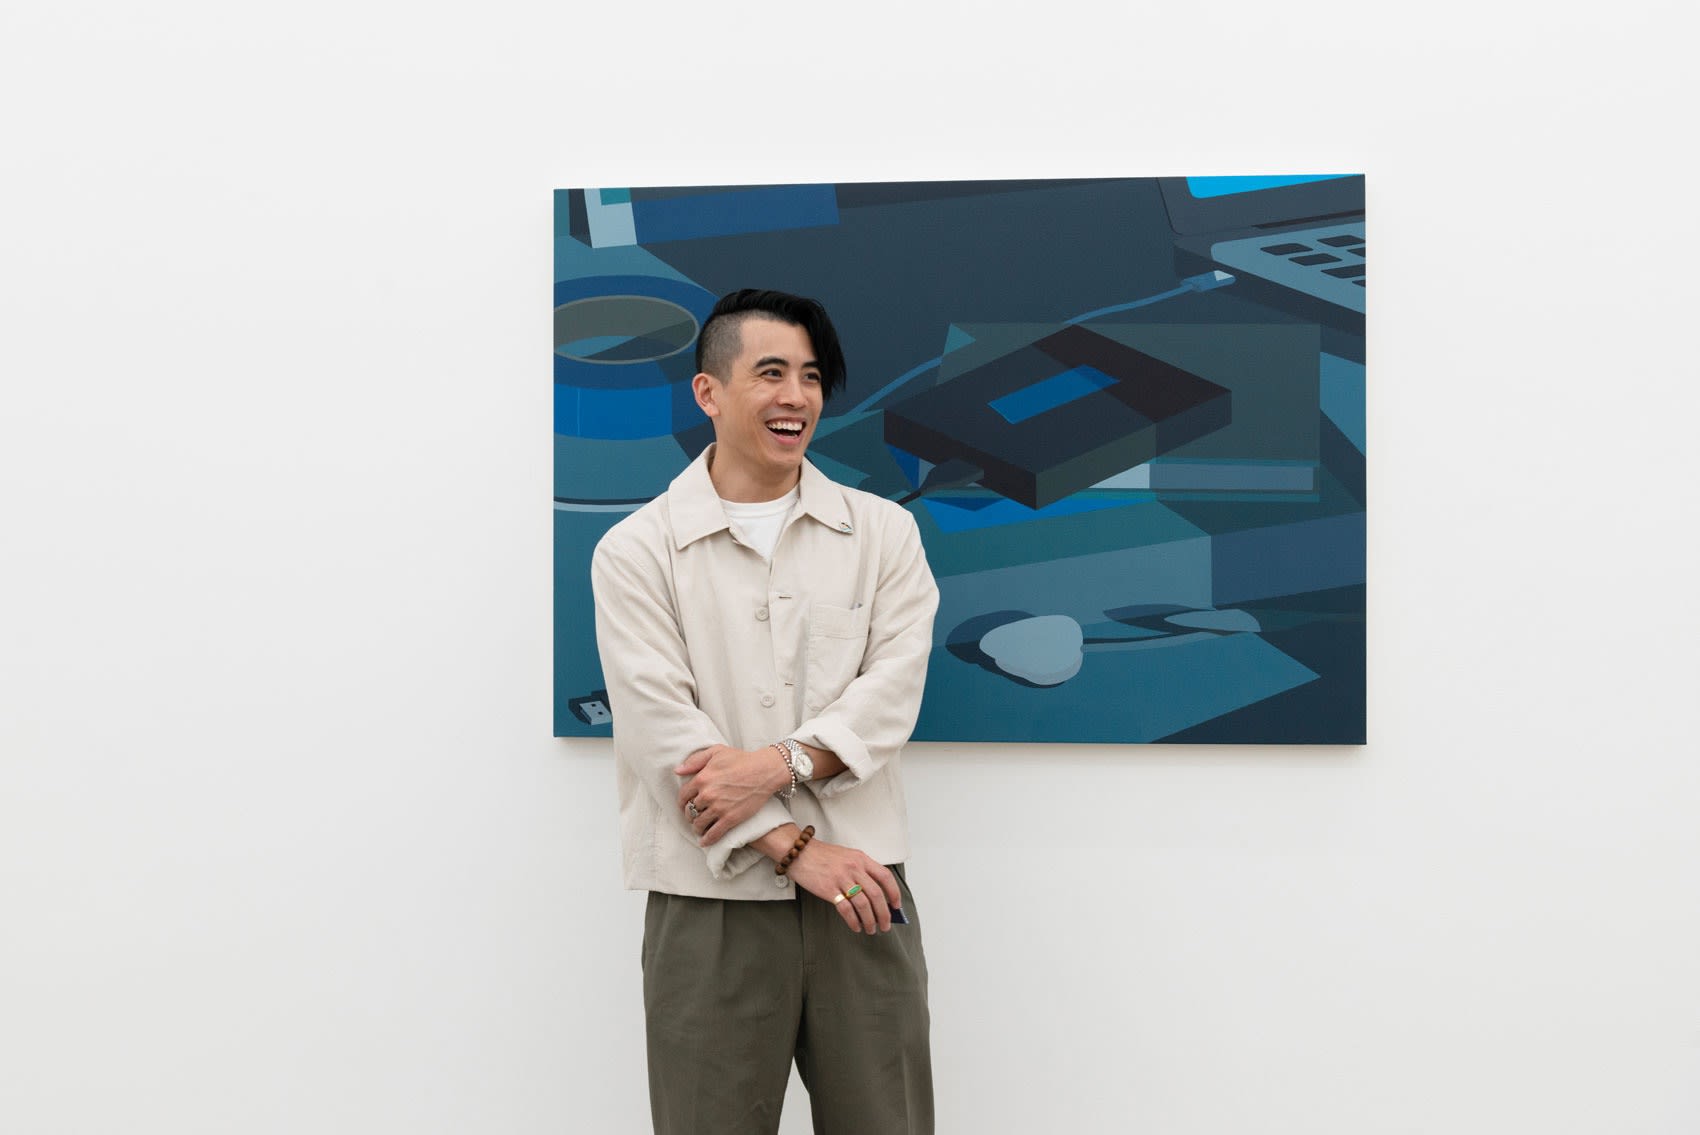 Artist Adrian Kay Wong in front of his painting Blue at the opening reception of Softly